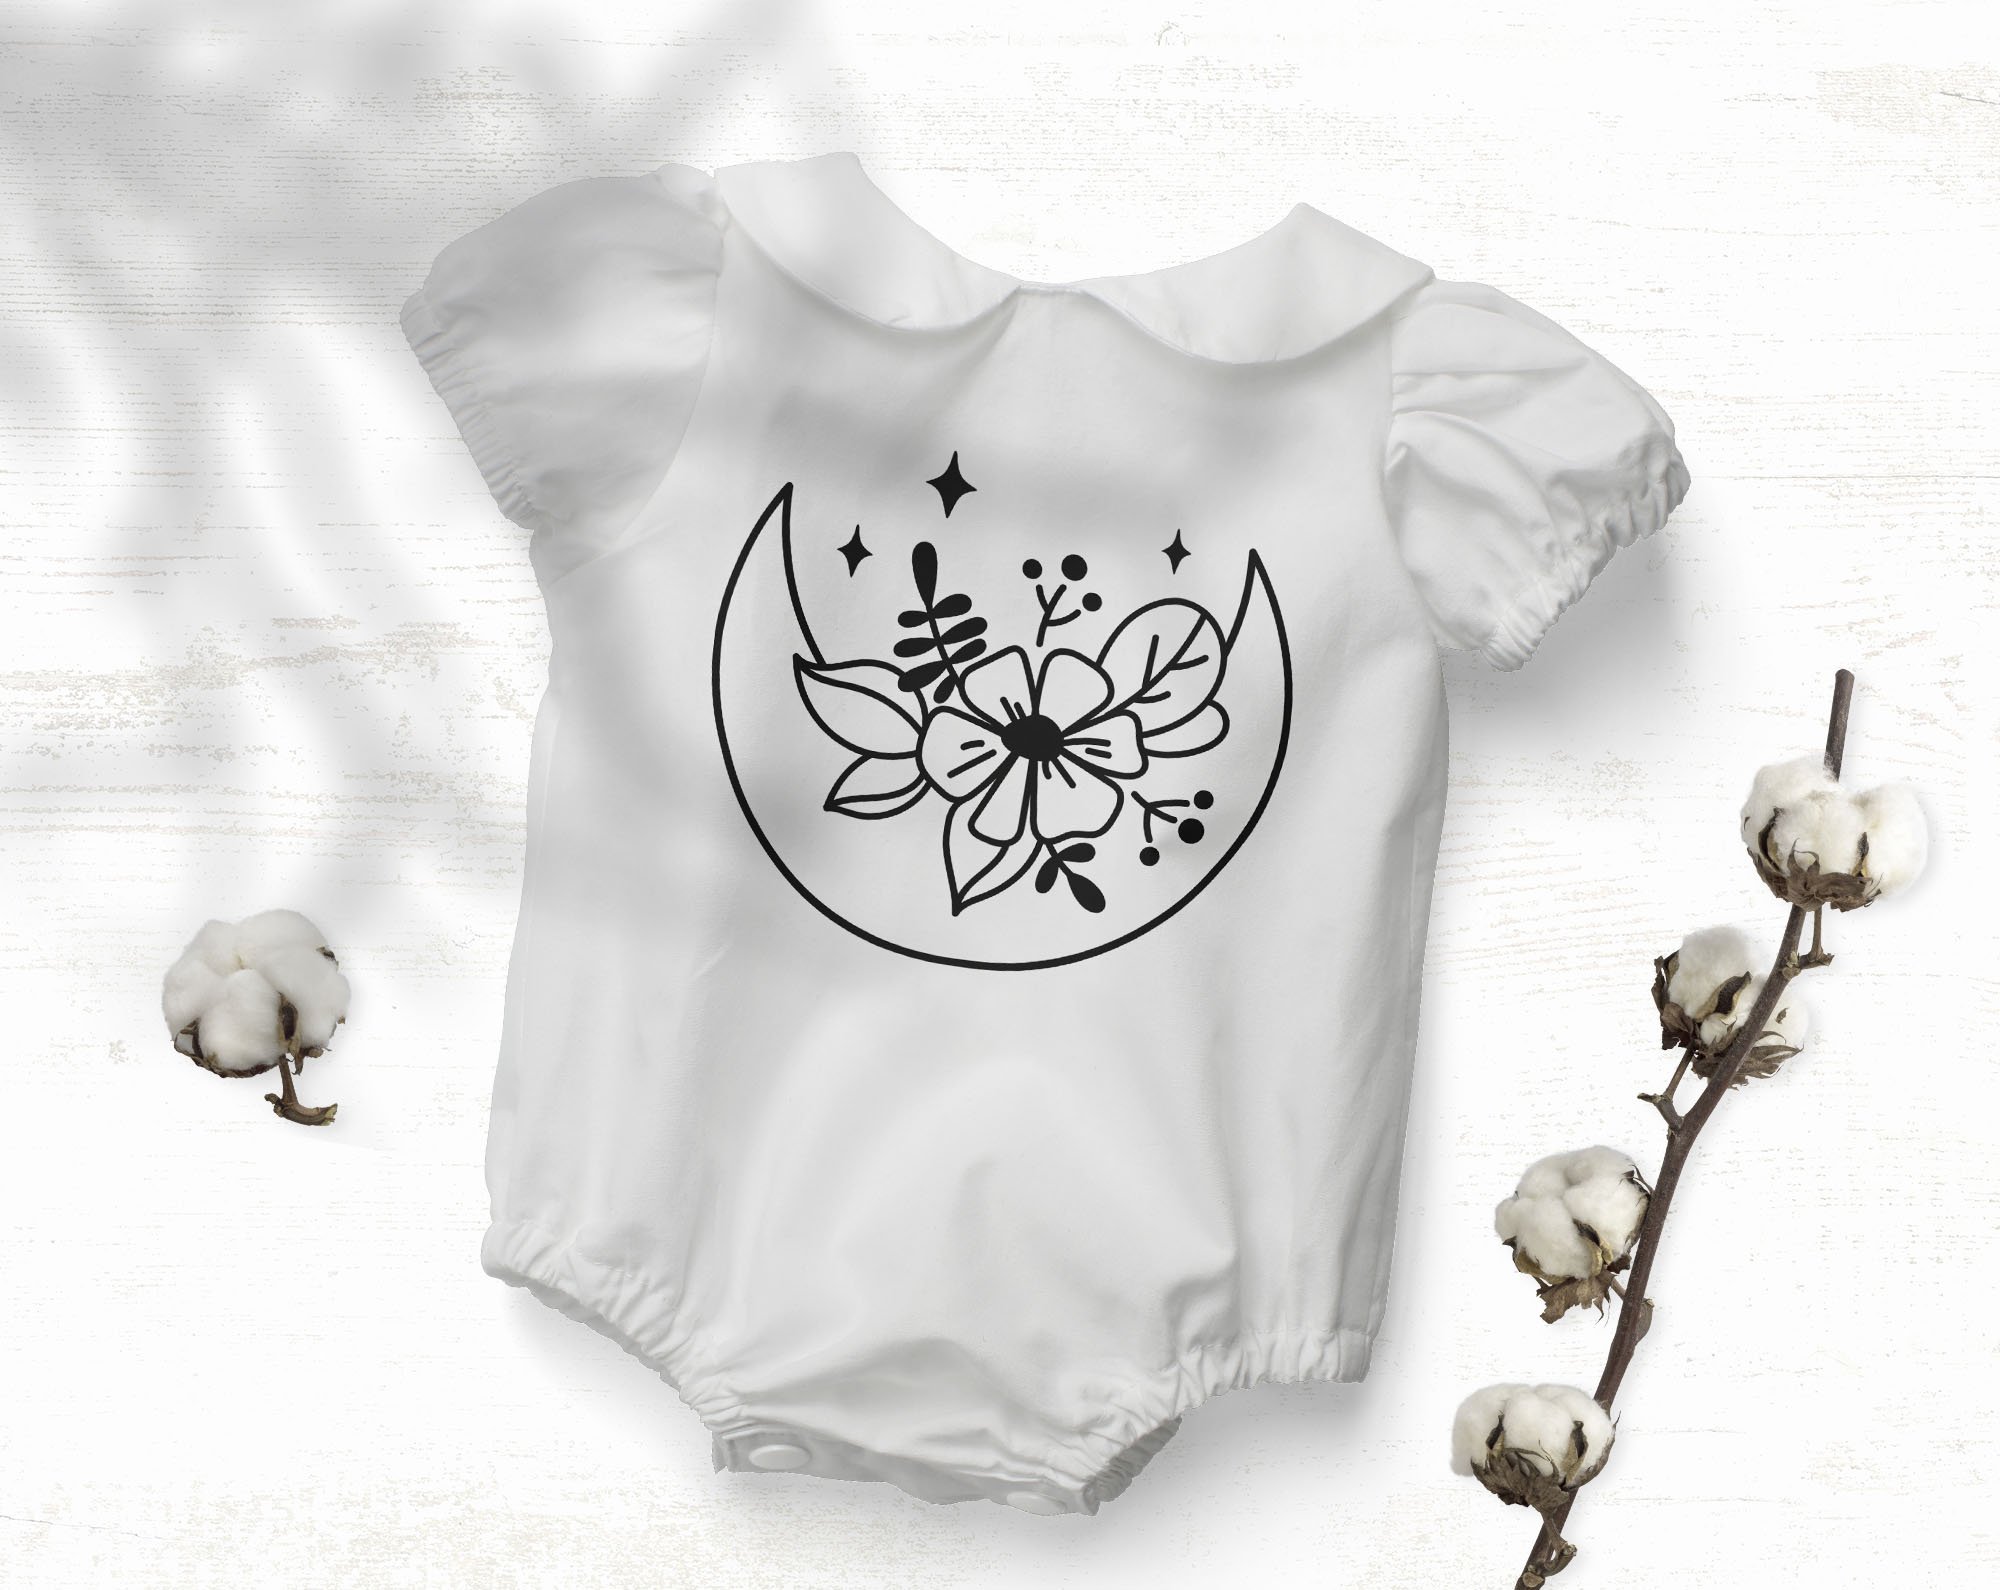 Baby white t-shirt with illustration.